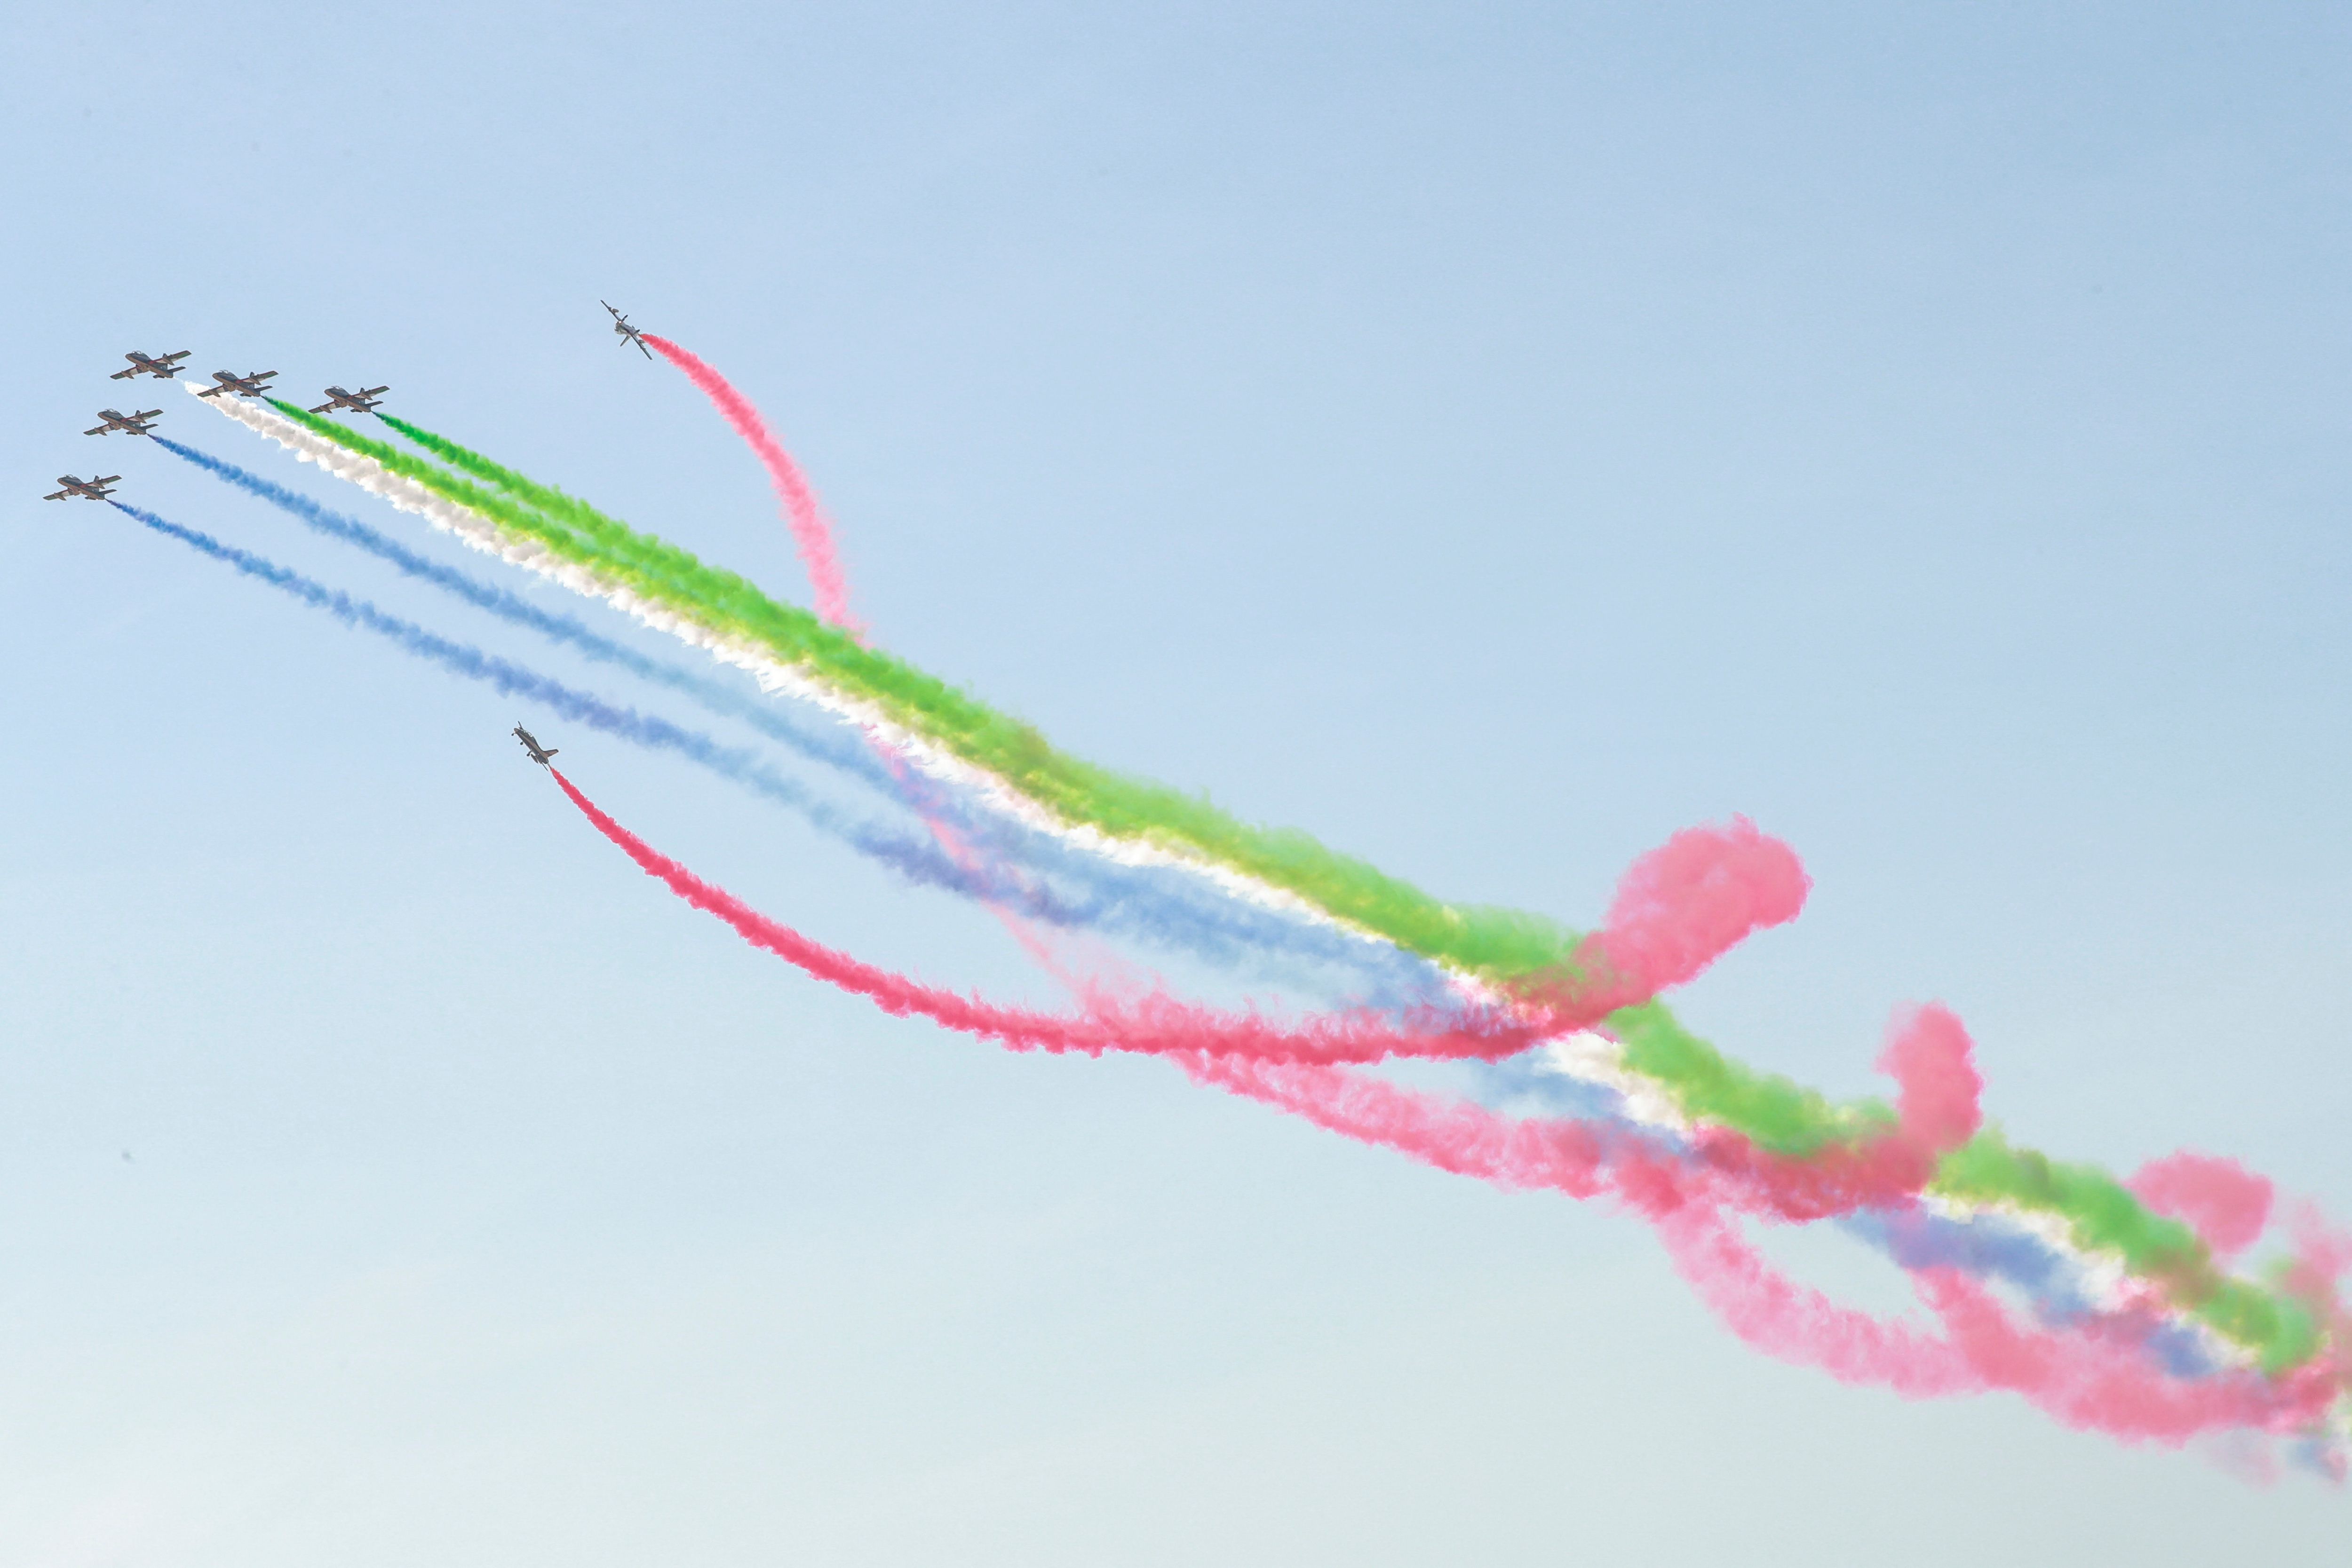 Aircrafts perform during an airshow at NAVDEX, an annual event that happens alonside the International Defence Exhibition and Conference (IDEX) in Abu Dhabi